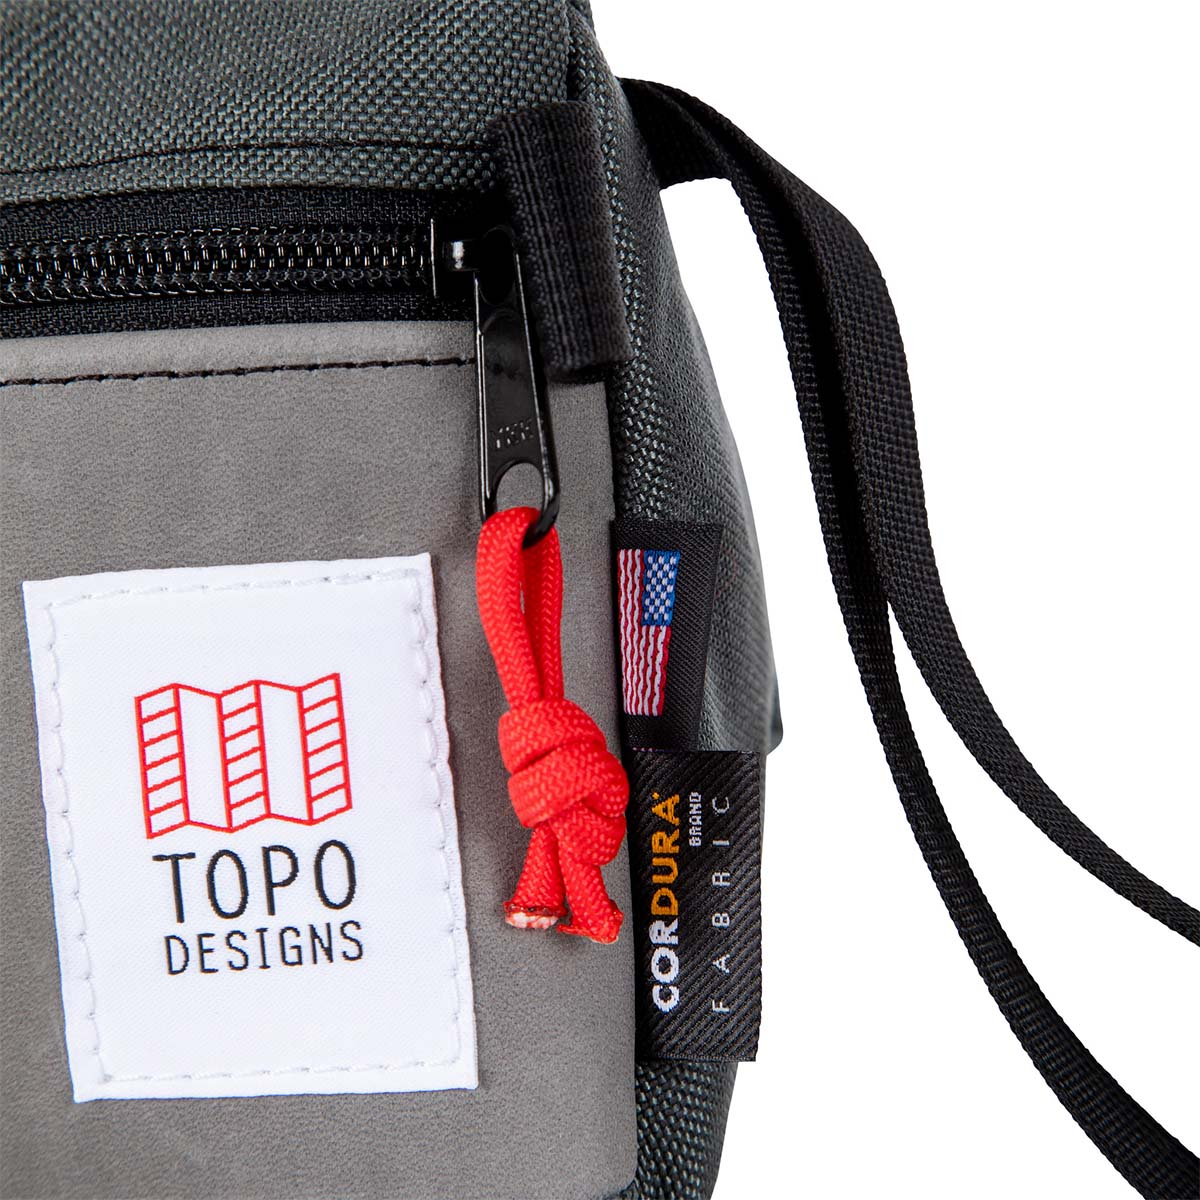 Topo Designs Dopp Kit Charcoal/Charcoal Leather, water-resistant, travel light, accessory bag